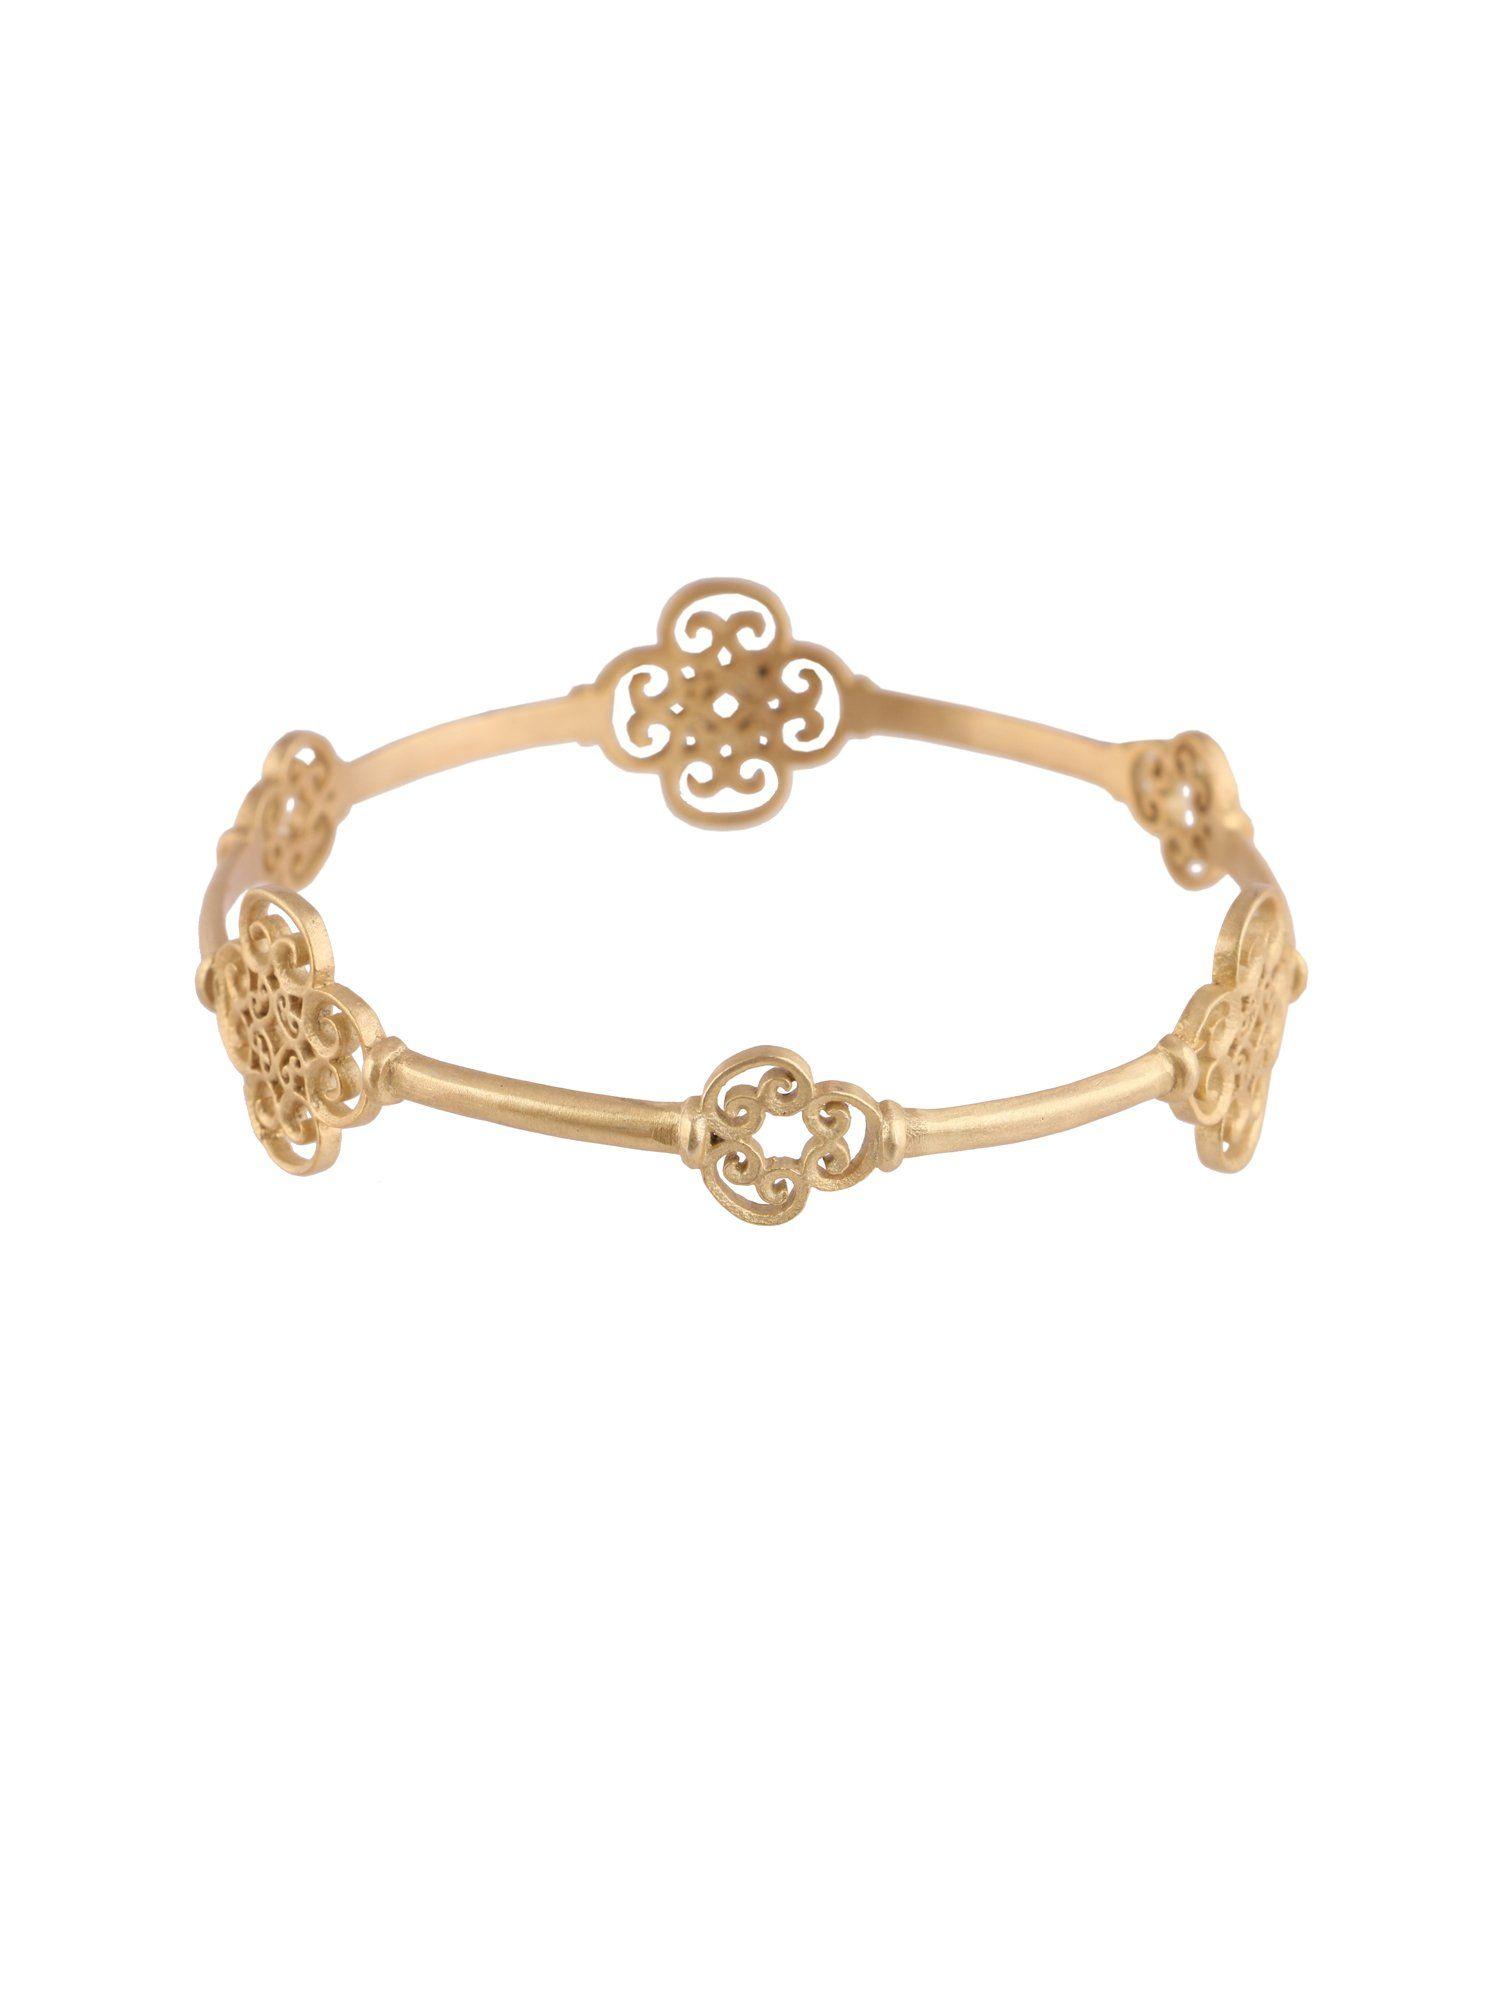 paint my love gold plated bangle